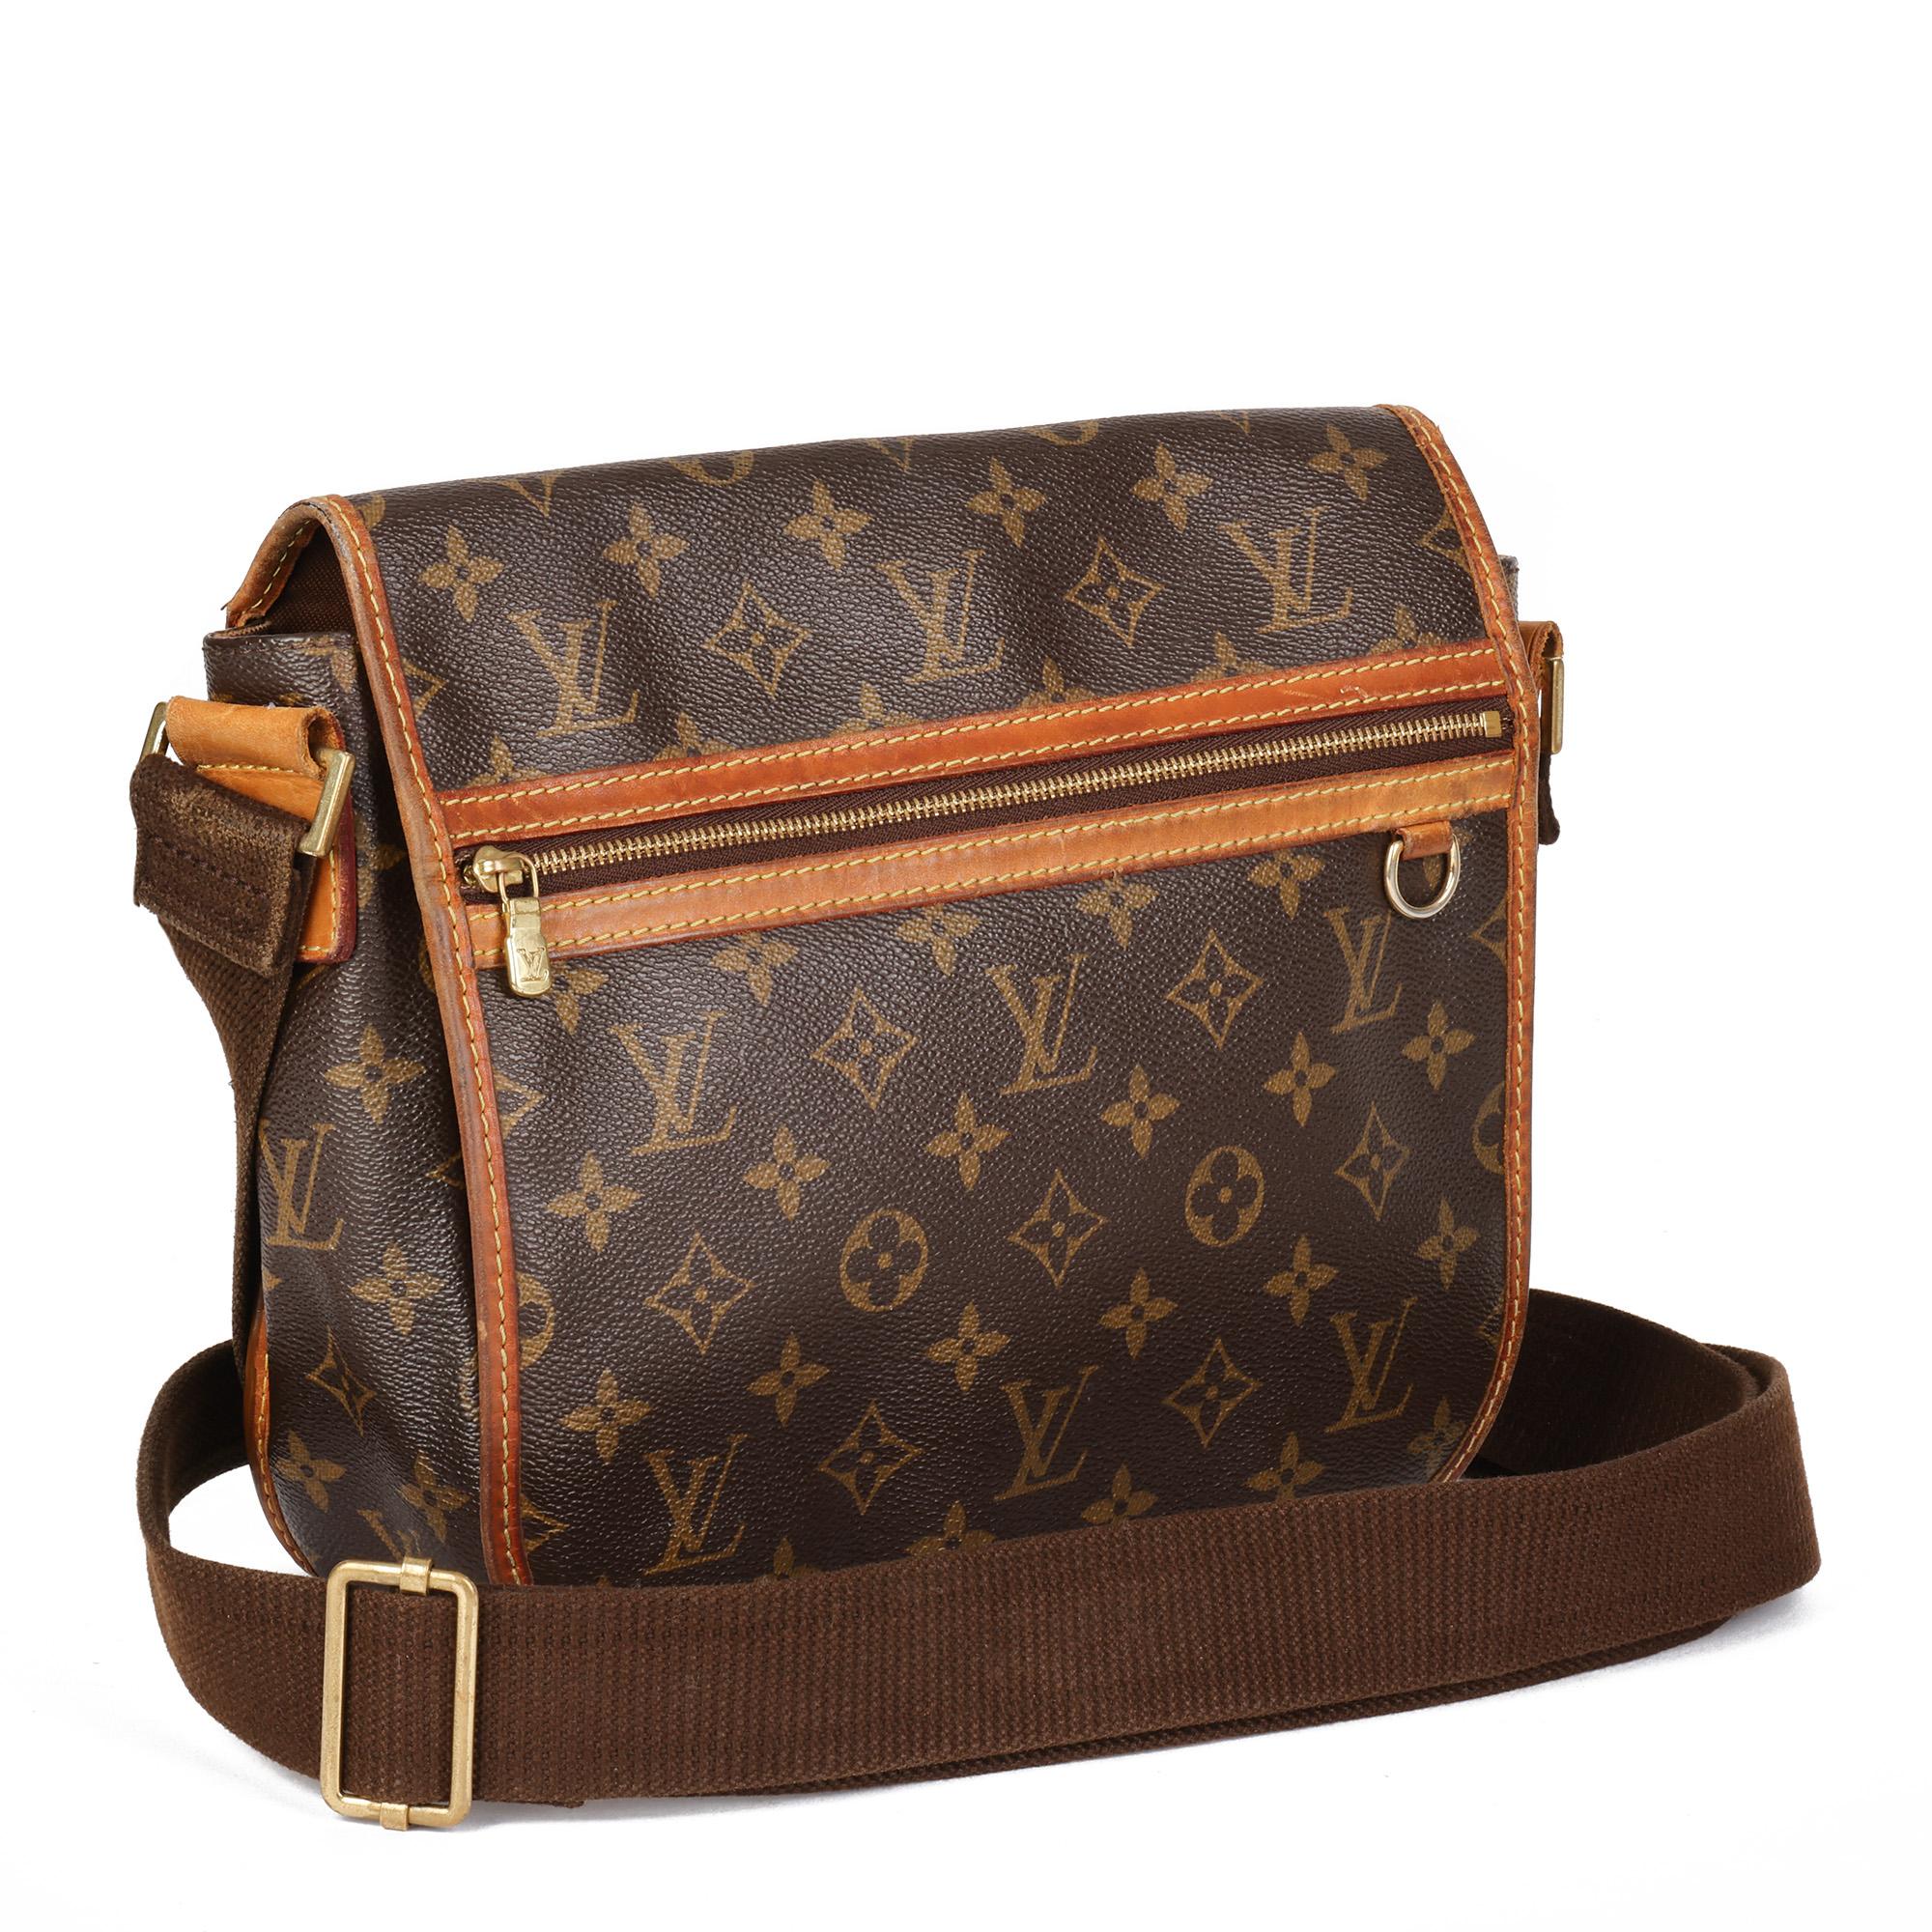 LOUIS VUITTON
Brown Monogram Coated Canvas & Vachetta Leather Bosphore Messenger PM

Xupes Reference: CB619
Serial Number: MI0067
Age (Circa): 2007
Accompanied By: Louis Vuitton Dust Bag
Authenticity Details: Date Stamp (Made in France)
Gender: